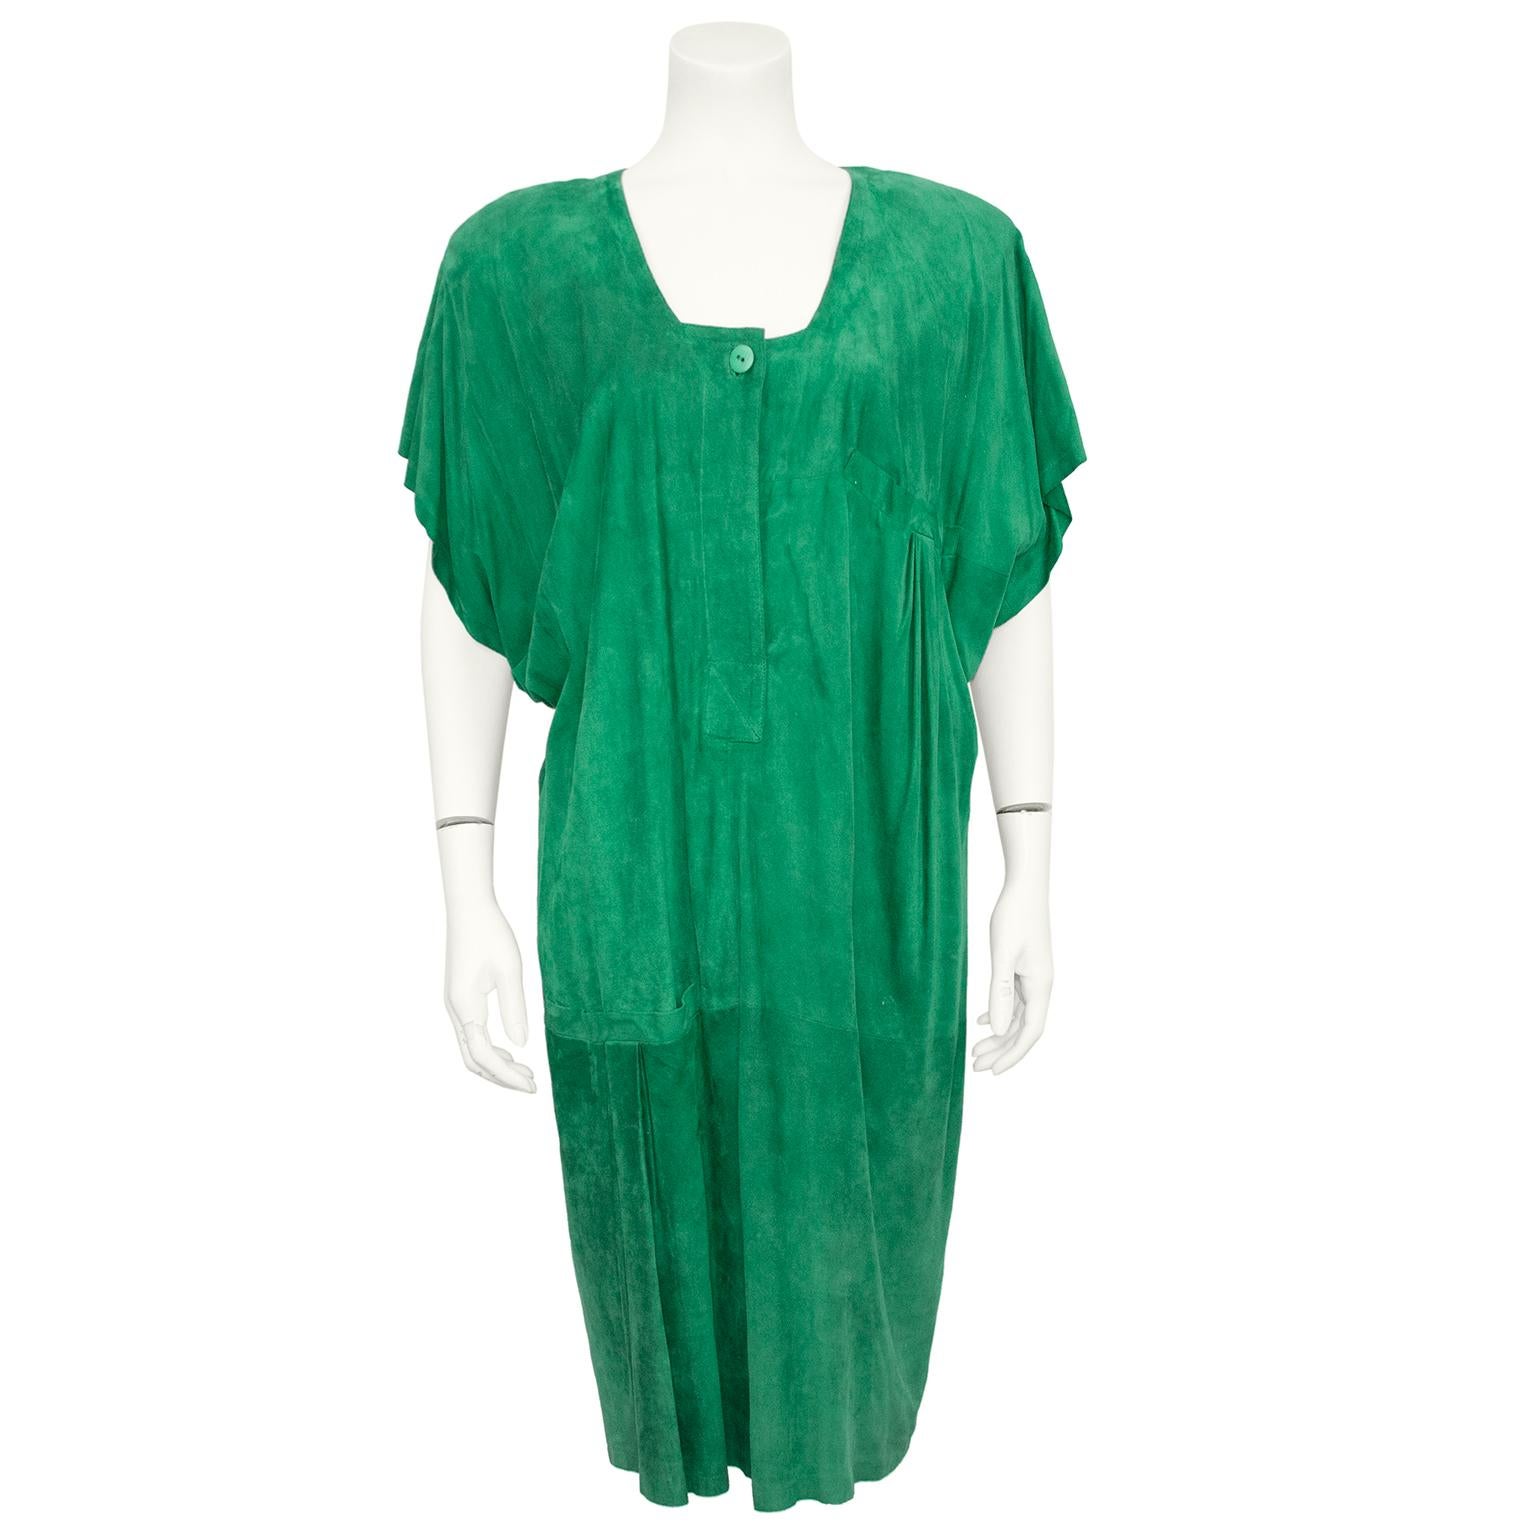 1980s Mario Valentino Kelly green oversized dress and coat ensemble. The set is made the the softest butter suede that is very lightweight. The coat has large shoulder pads that create a very defined shoulder, and hangs loose through the body. Long